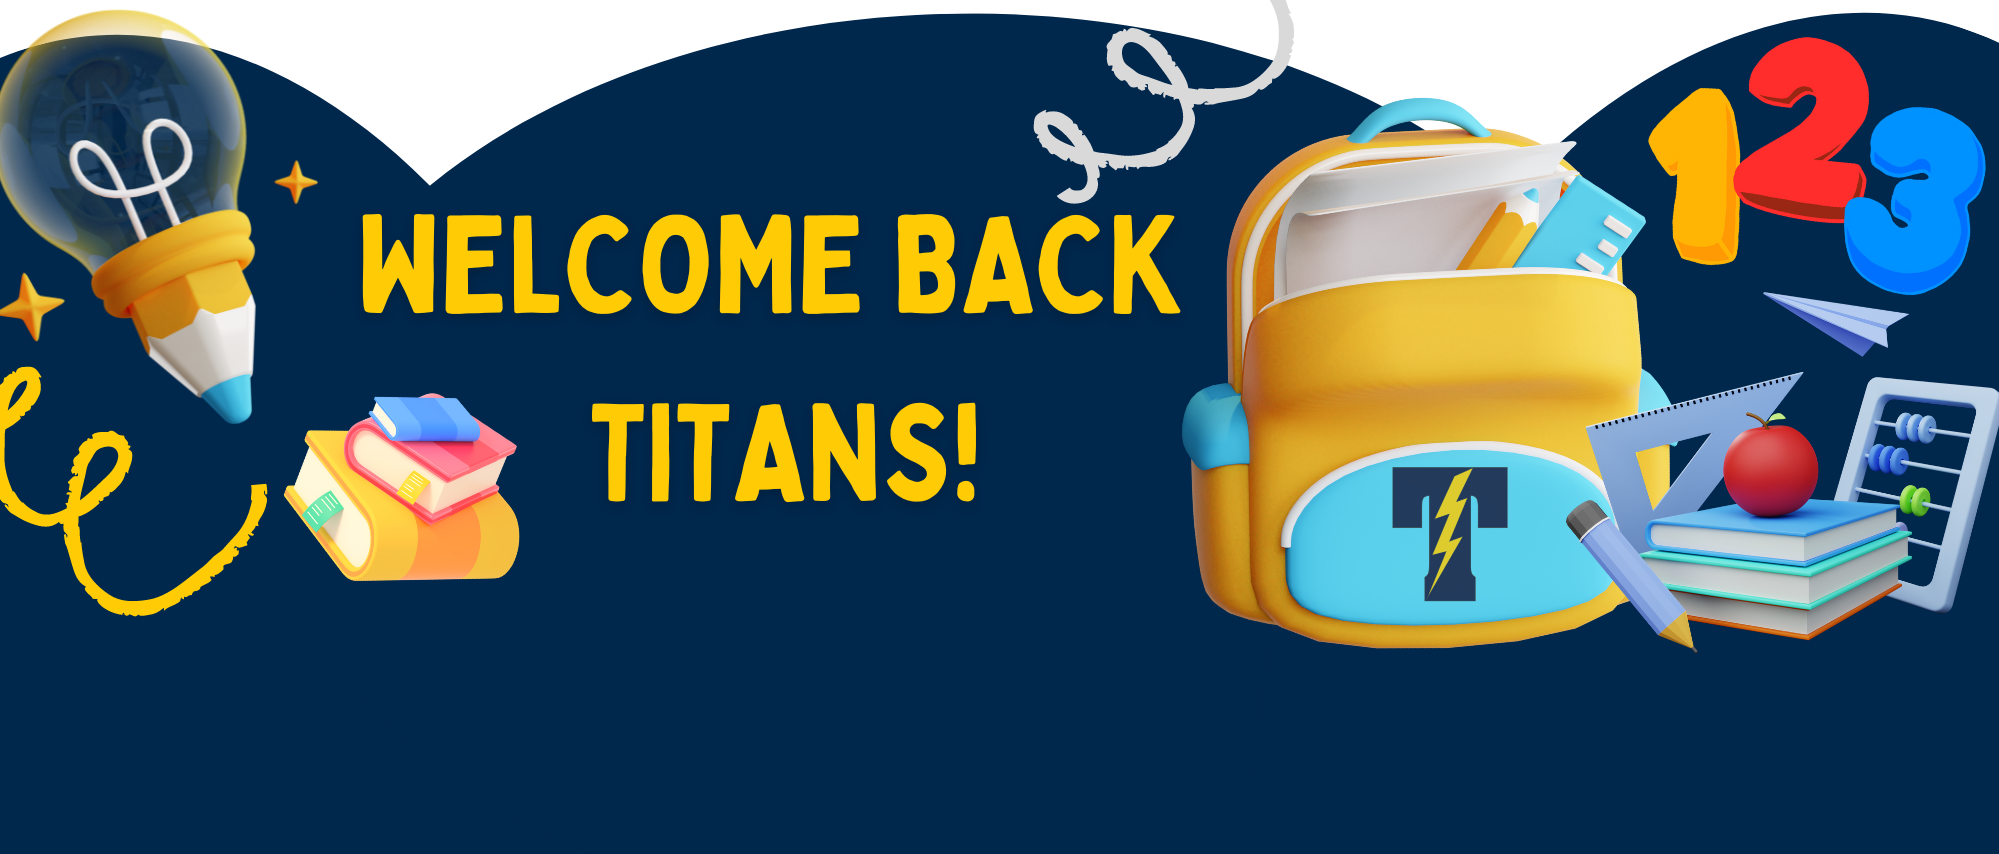 Welcome Back Titans